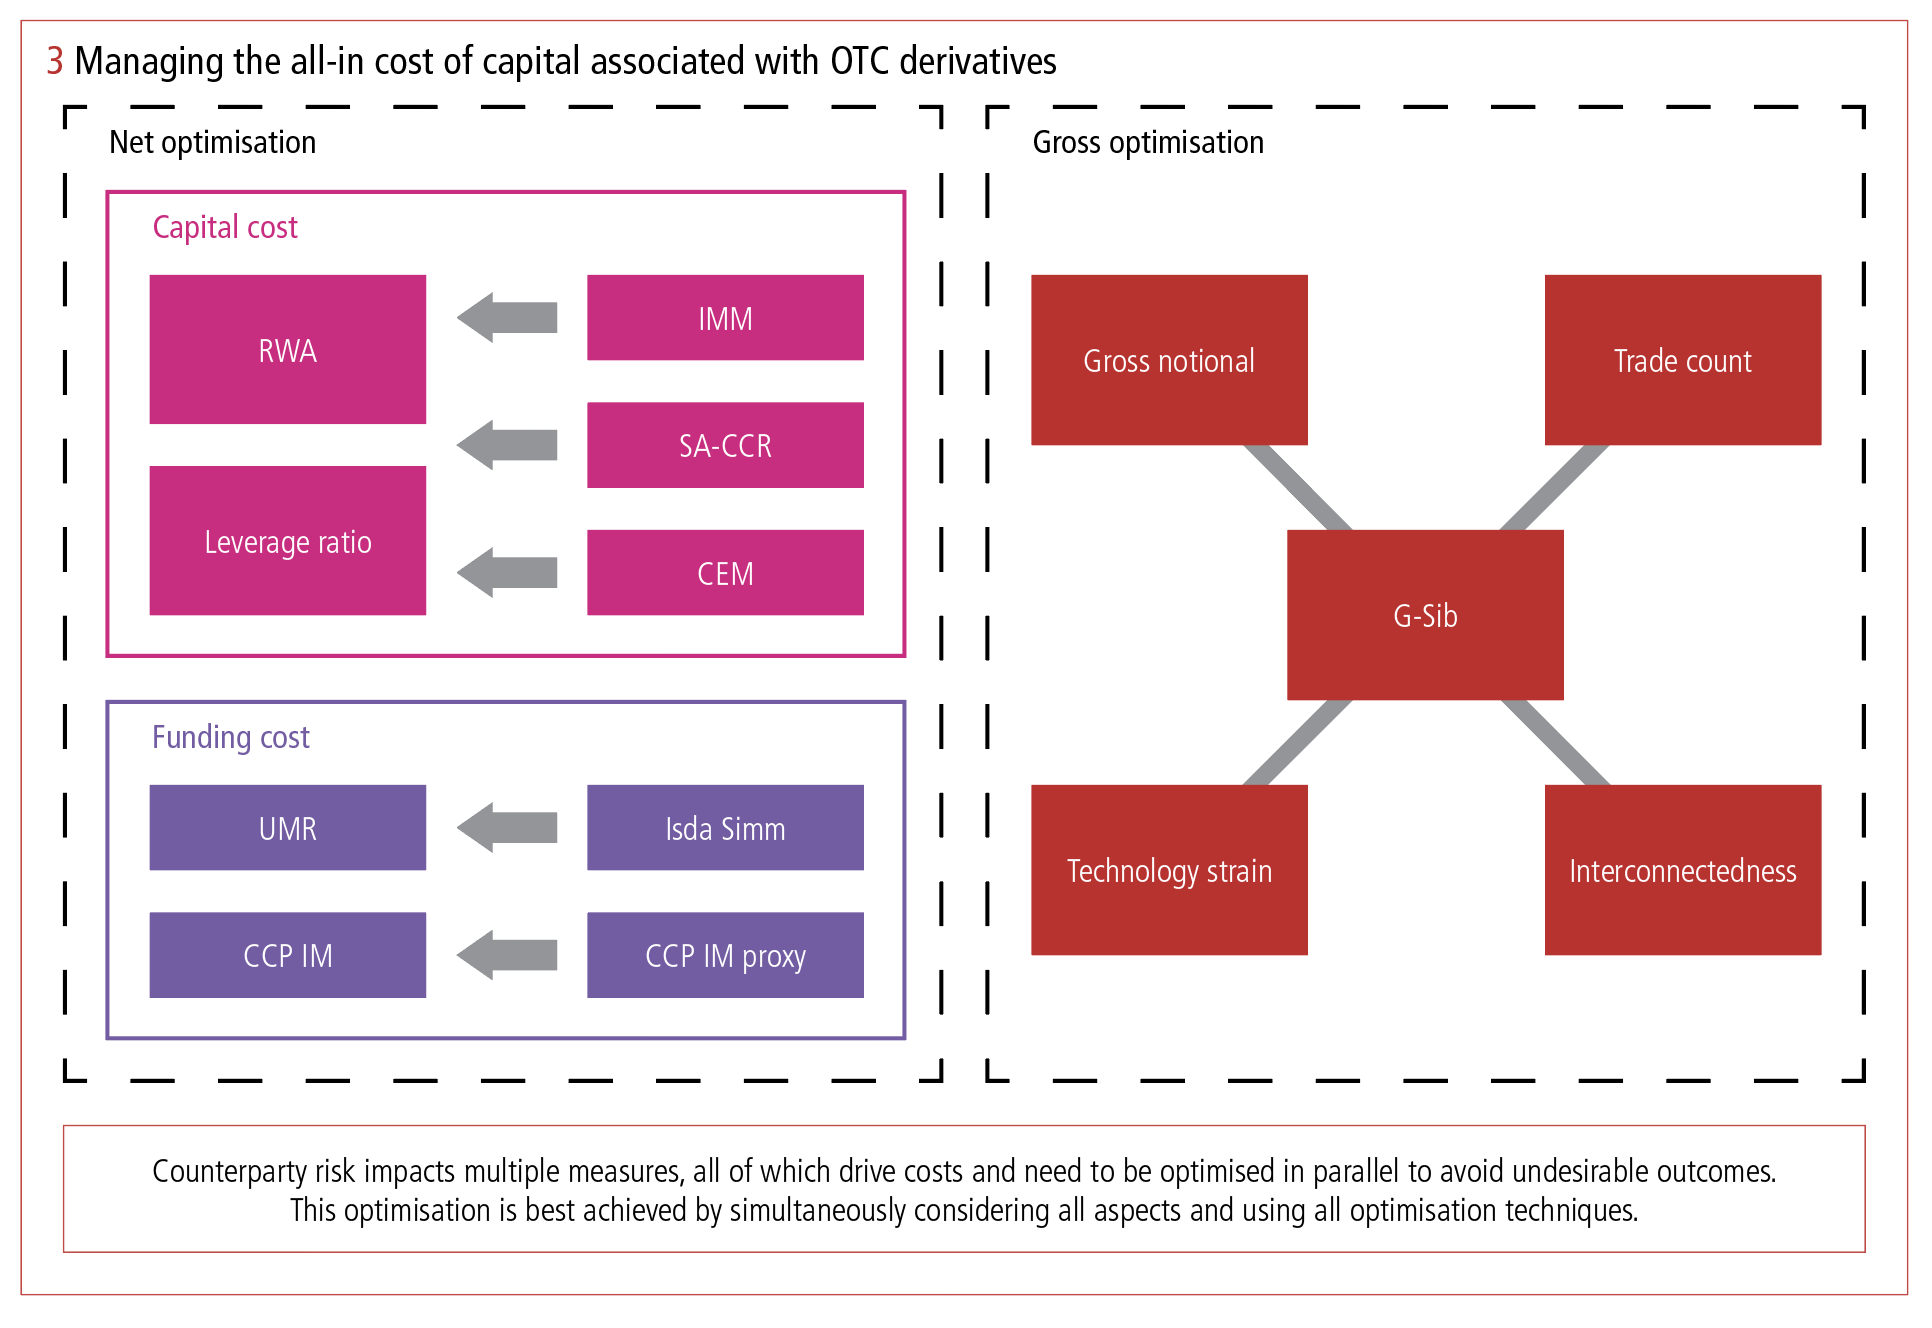 3 managing the all-in cost of capital associated with OTC derivatives